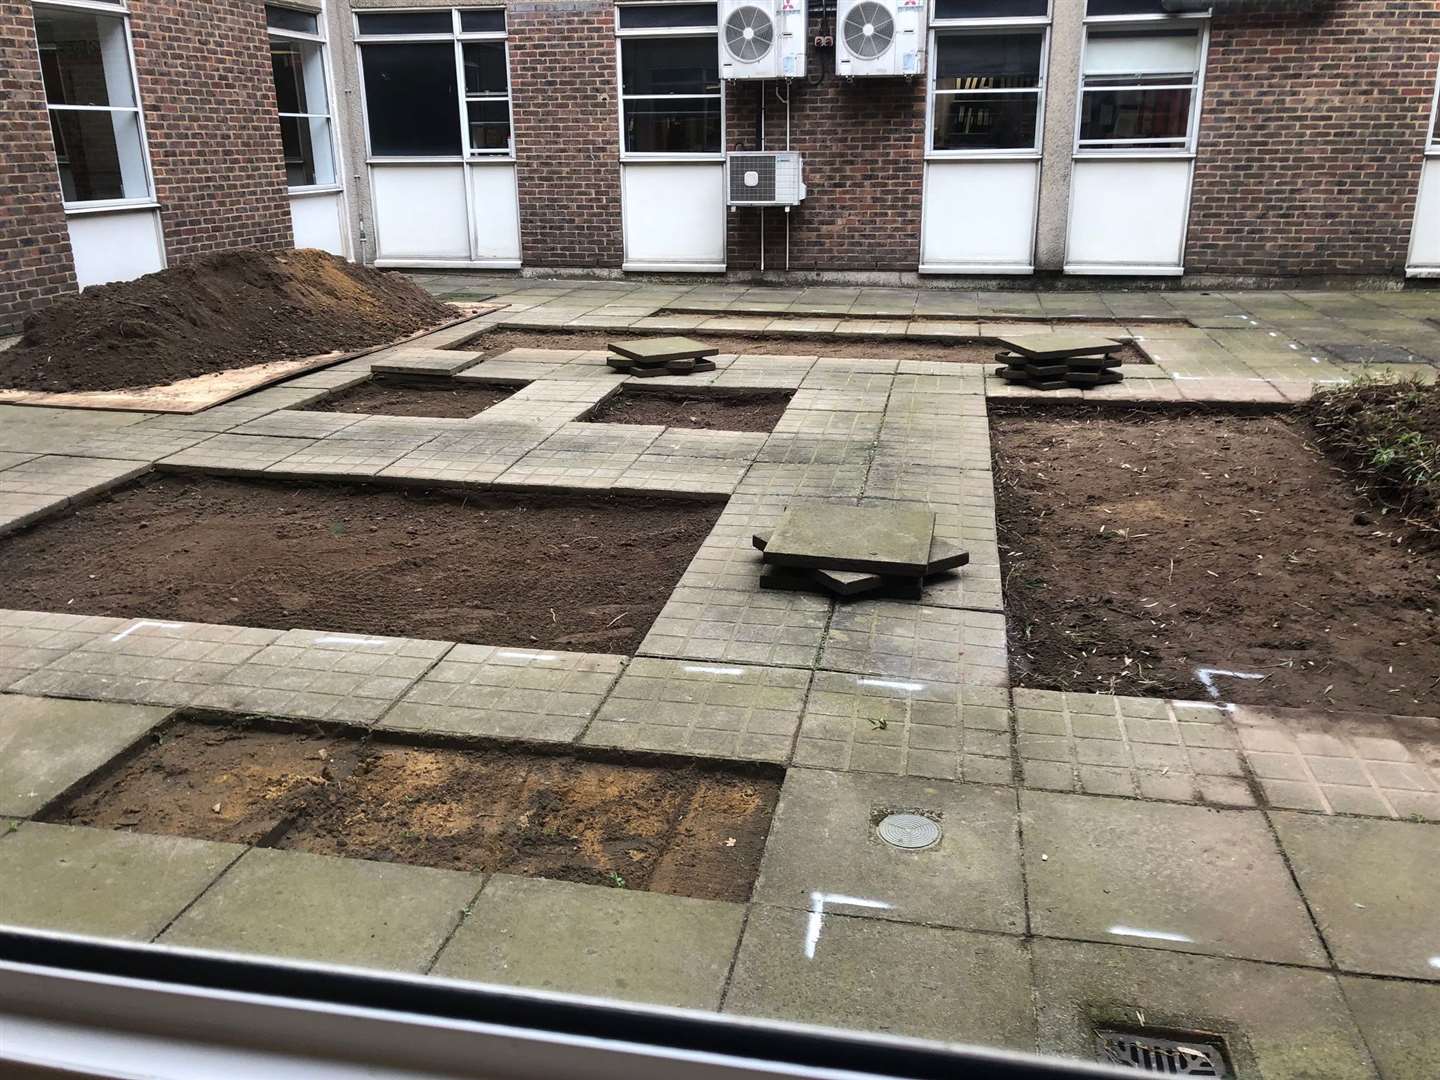 Tiles were removed before the flowerbeds and benches could be put in